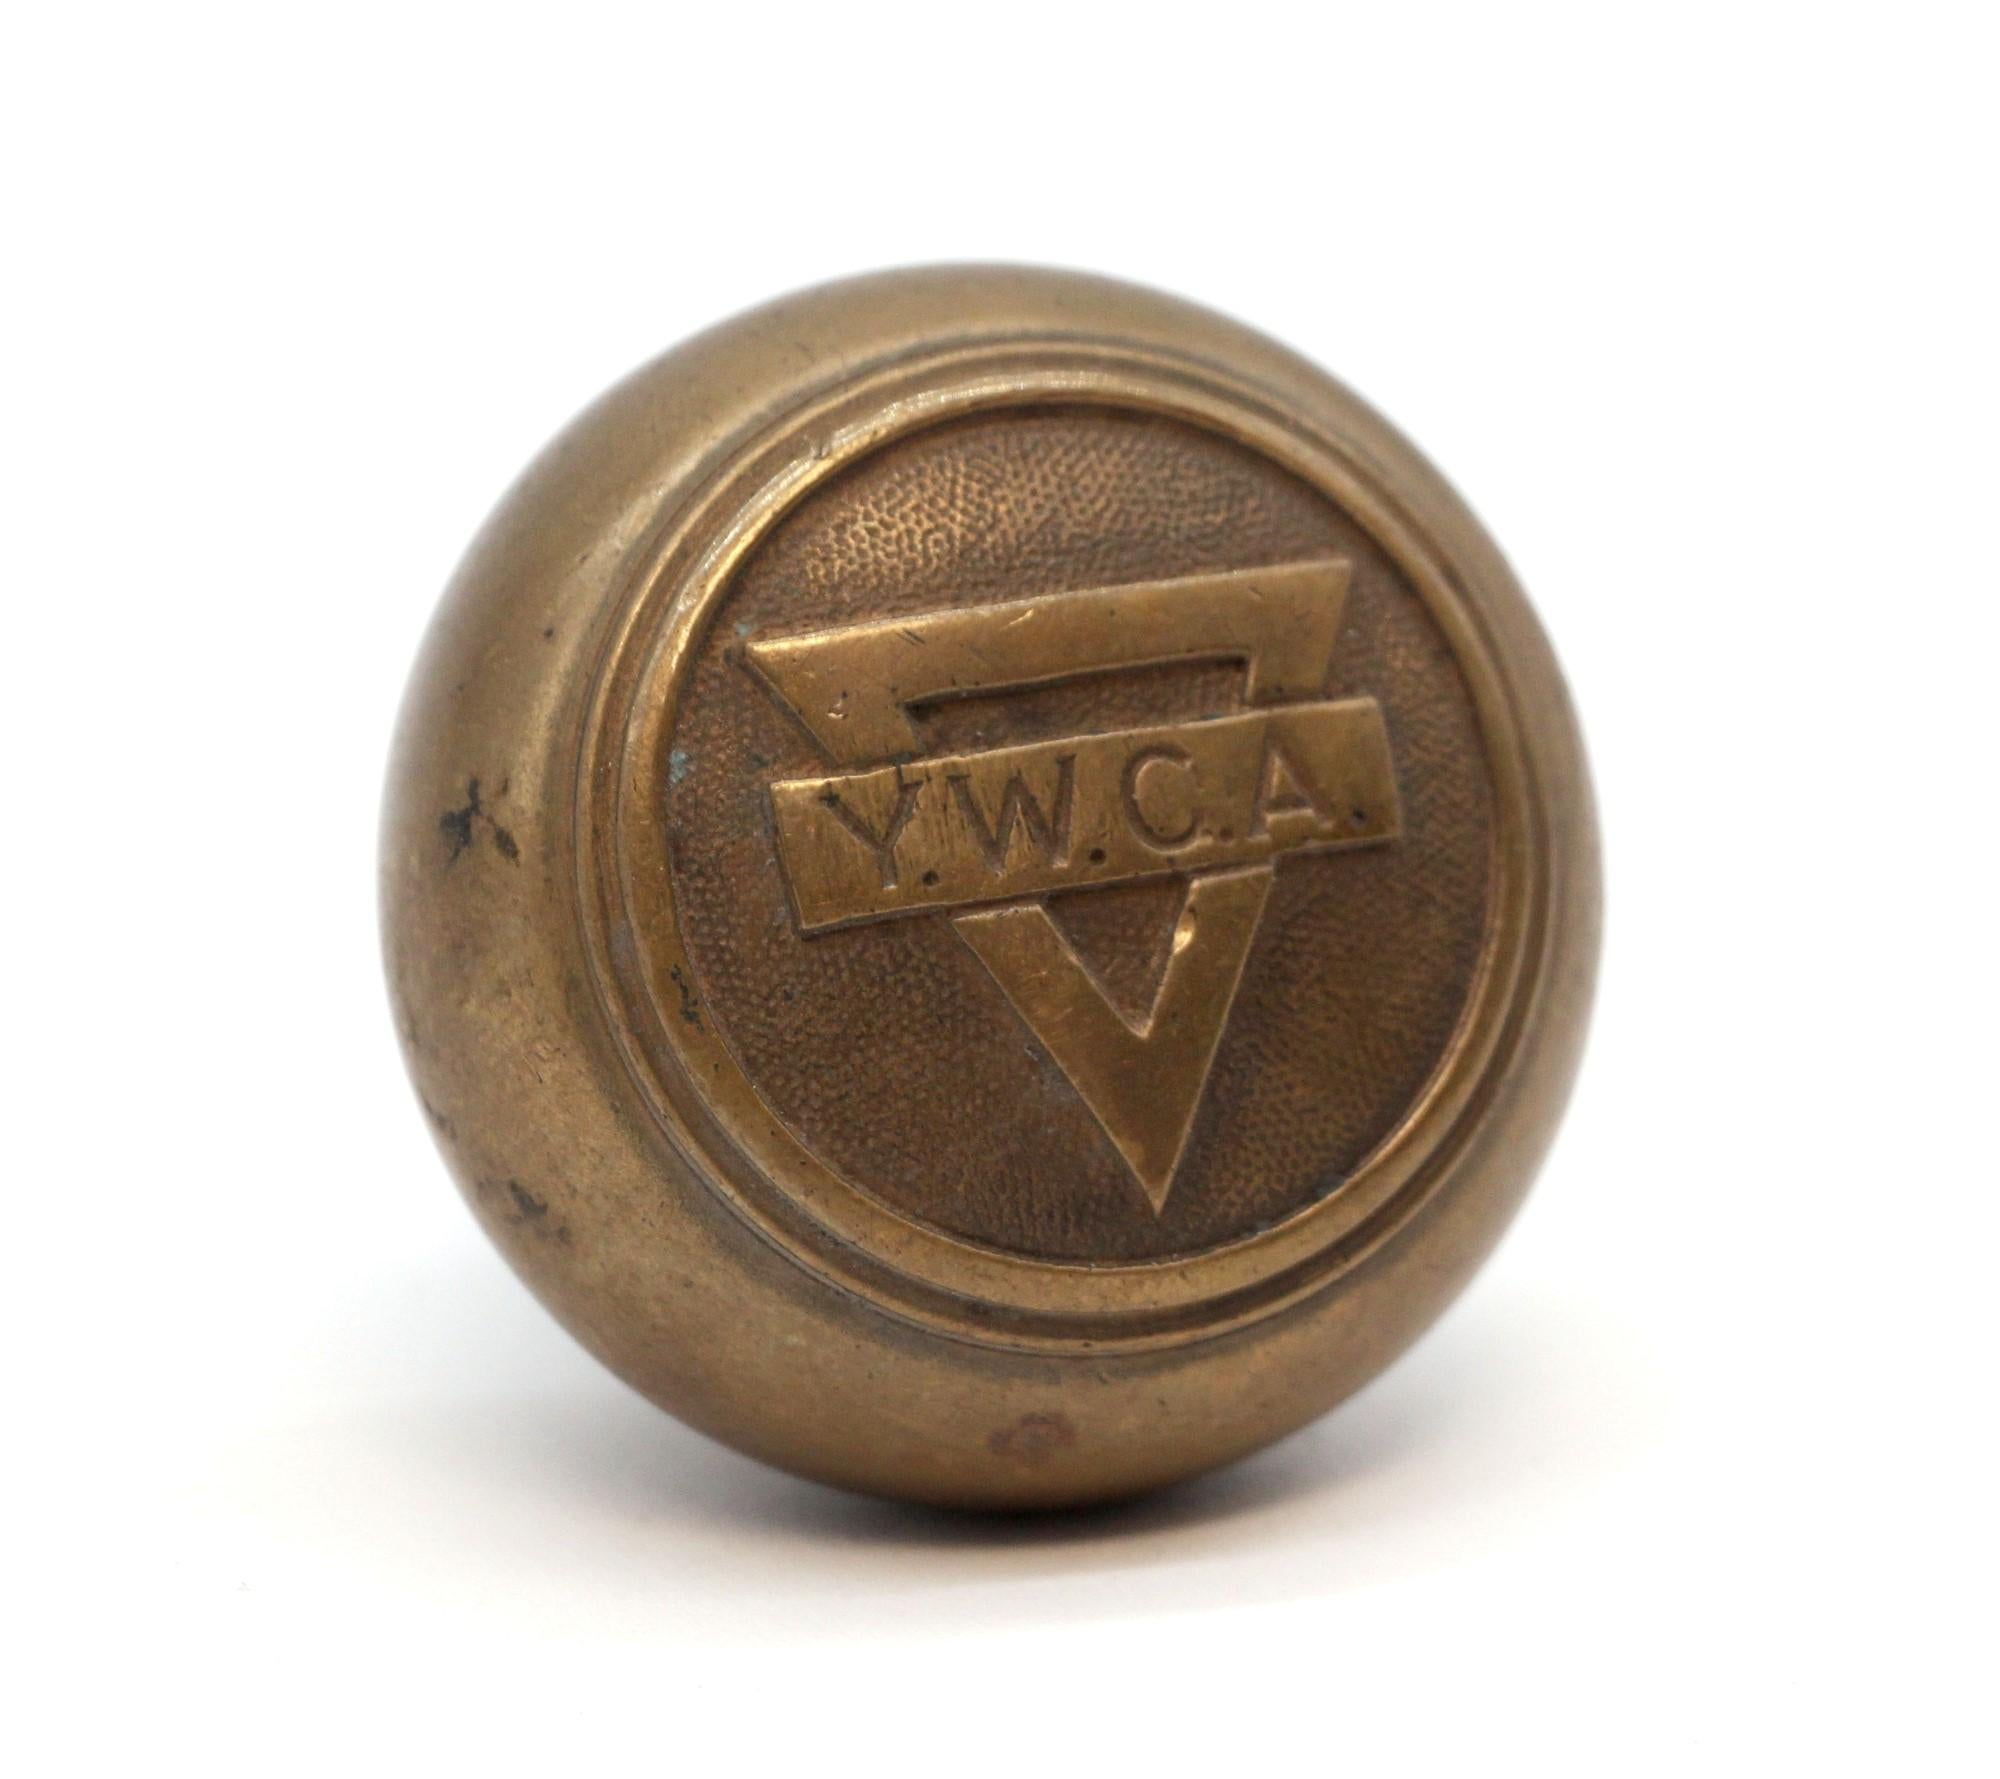 Early 20th century single brass door knob. This is part of the P-80460 YWCA group. Please note, this item is located in our Scranton, PA location.